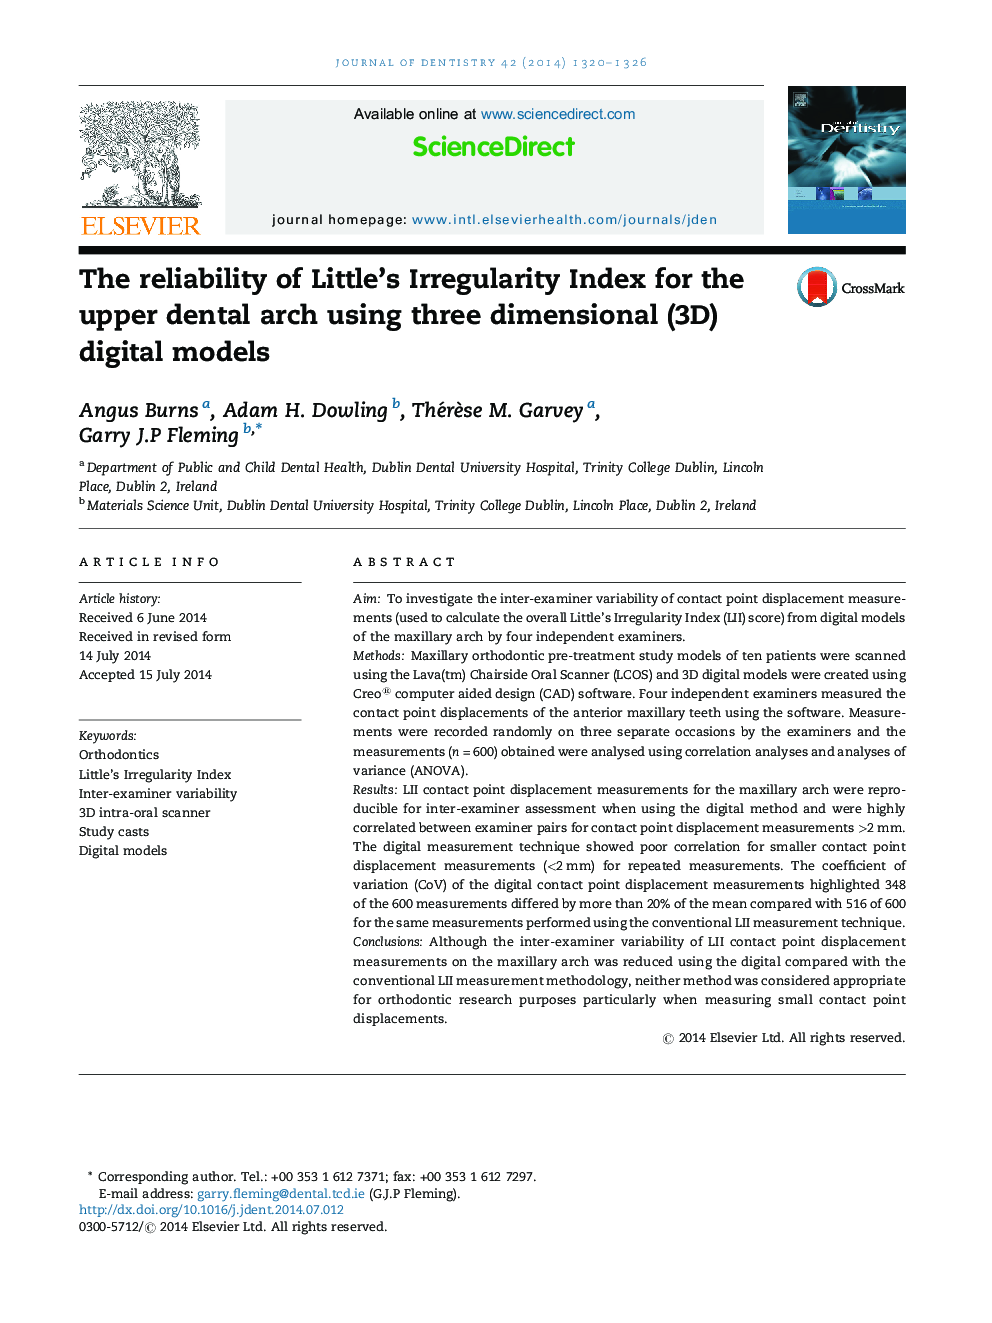 The reliability of Little's Irregularity Index for the upper dental arch using three dimensional (3D) digital models